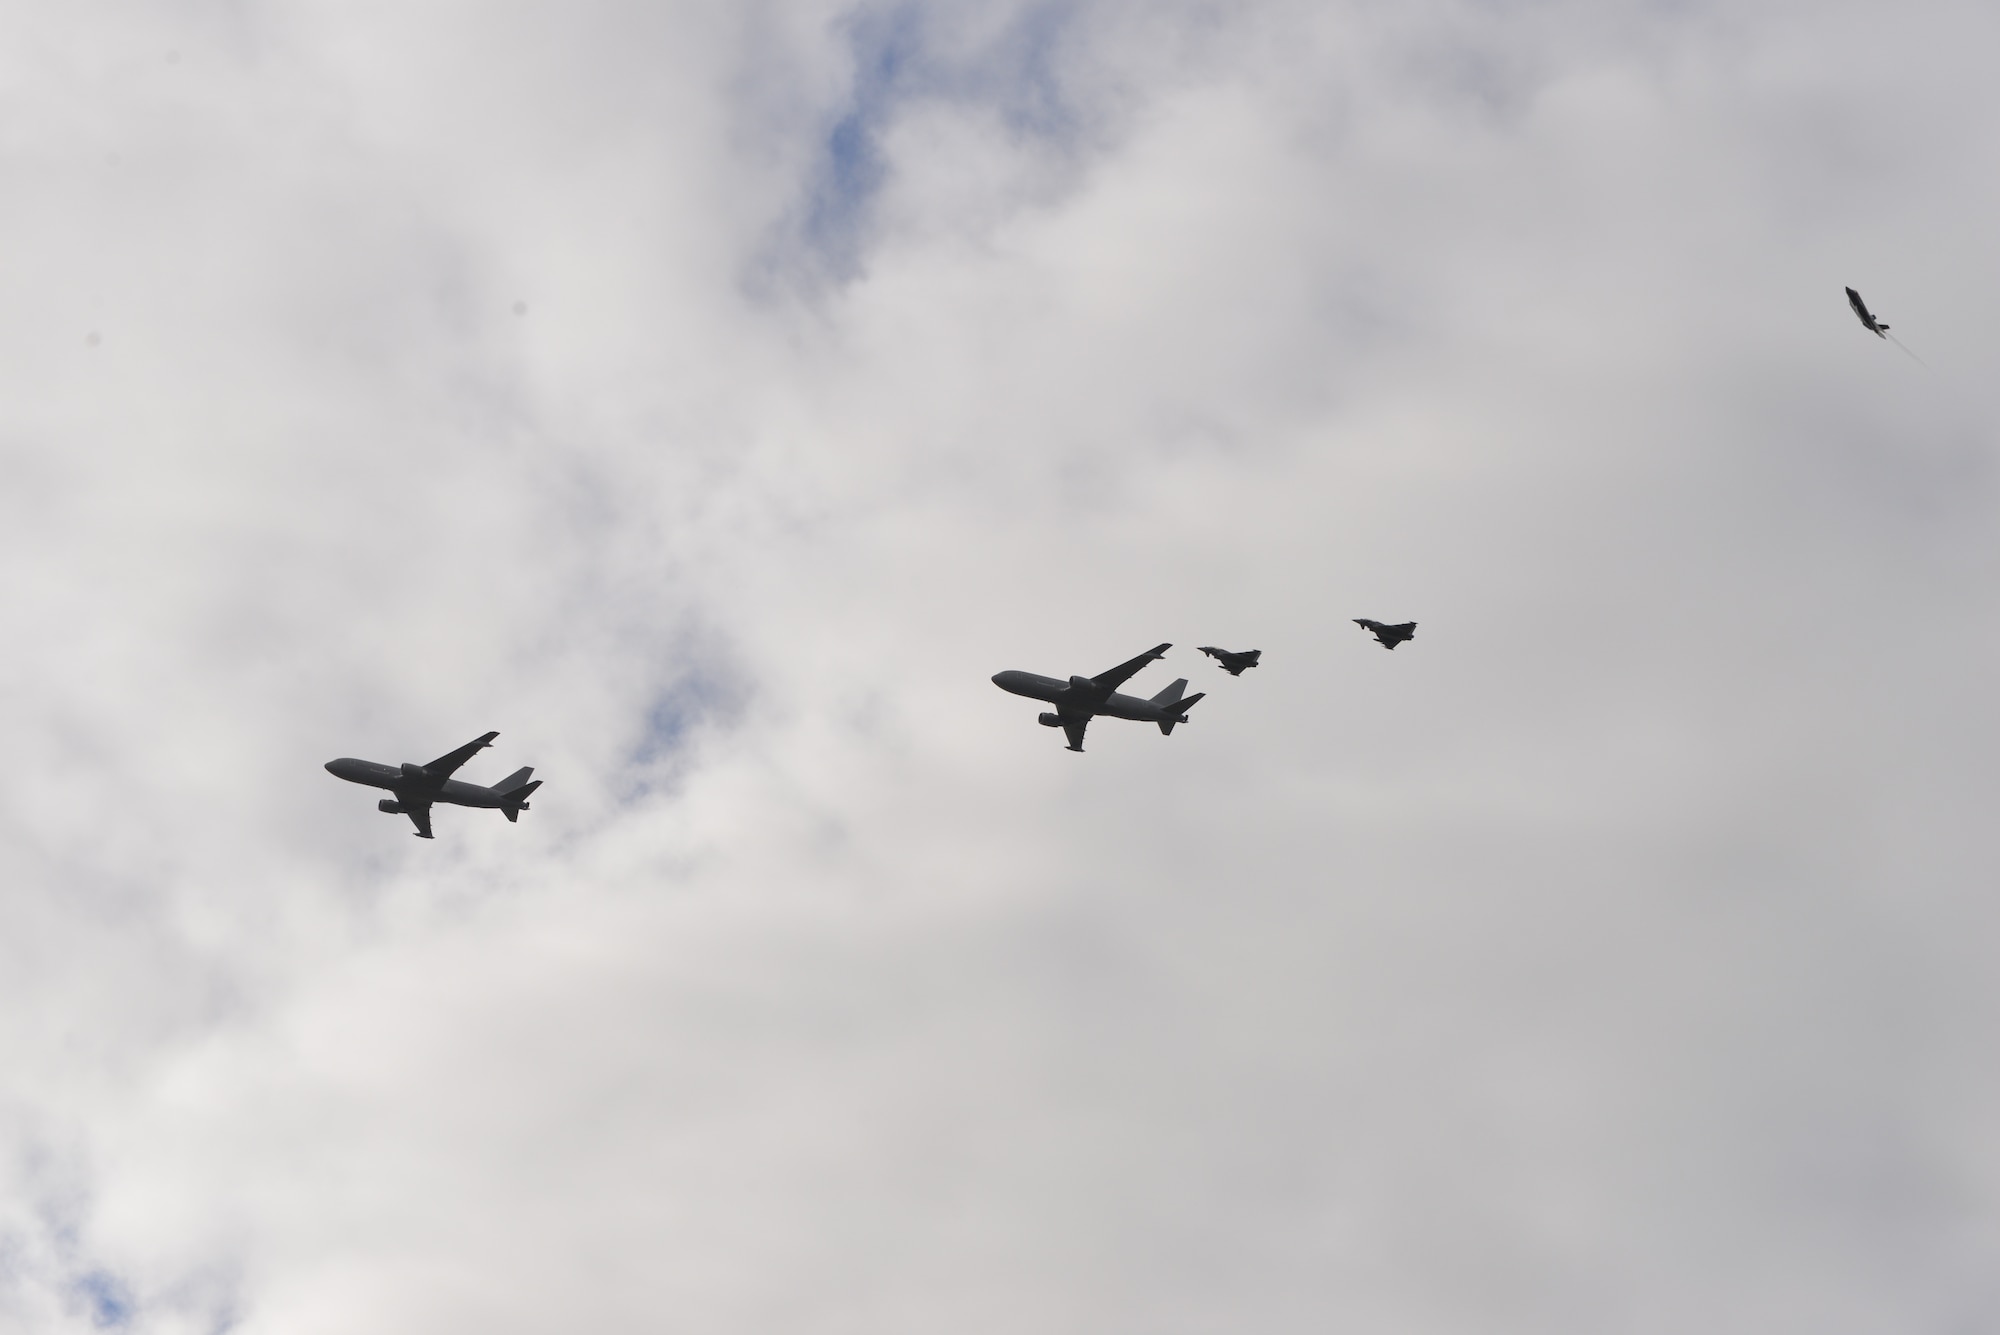 Two Italian Air Force KC-767 aerial refueling tankers, two Typhoon escorts and an Italian Air Force F-35A Lightning II pass over the airfield on February 3, 2016 at Lajes Field, Azores Portugal. The Italian F-35A Lightning II refueled at Lajes Field on the first trans-Atlantic Ocean crossing from Cameri, Air Base Italy to Naval Air Station Patuxent River, Md., Feb 3-5.  (U.S. Air Force photo by Ricky Baptista/Released)
